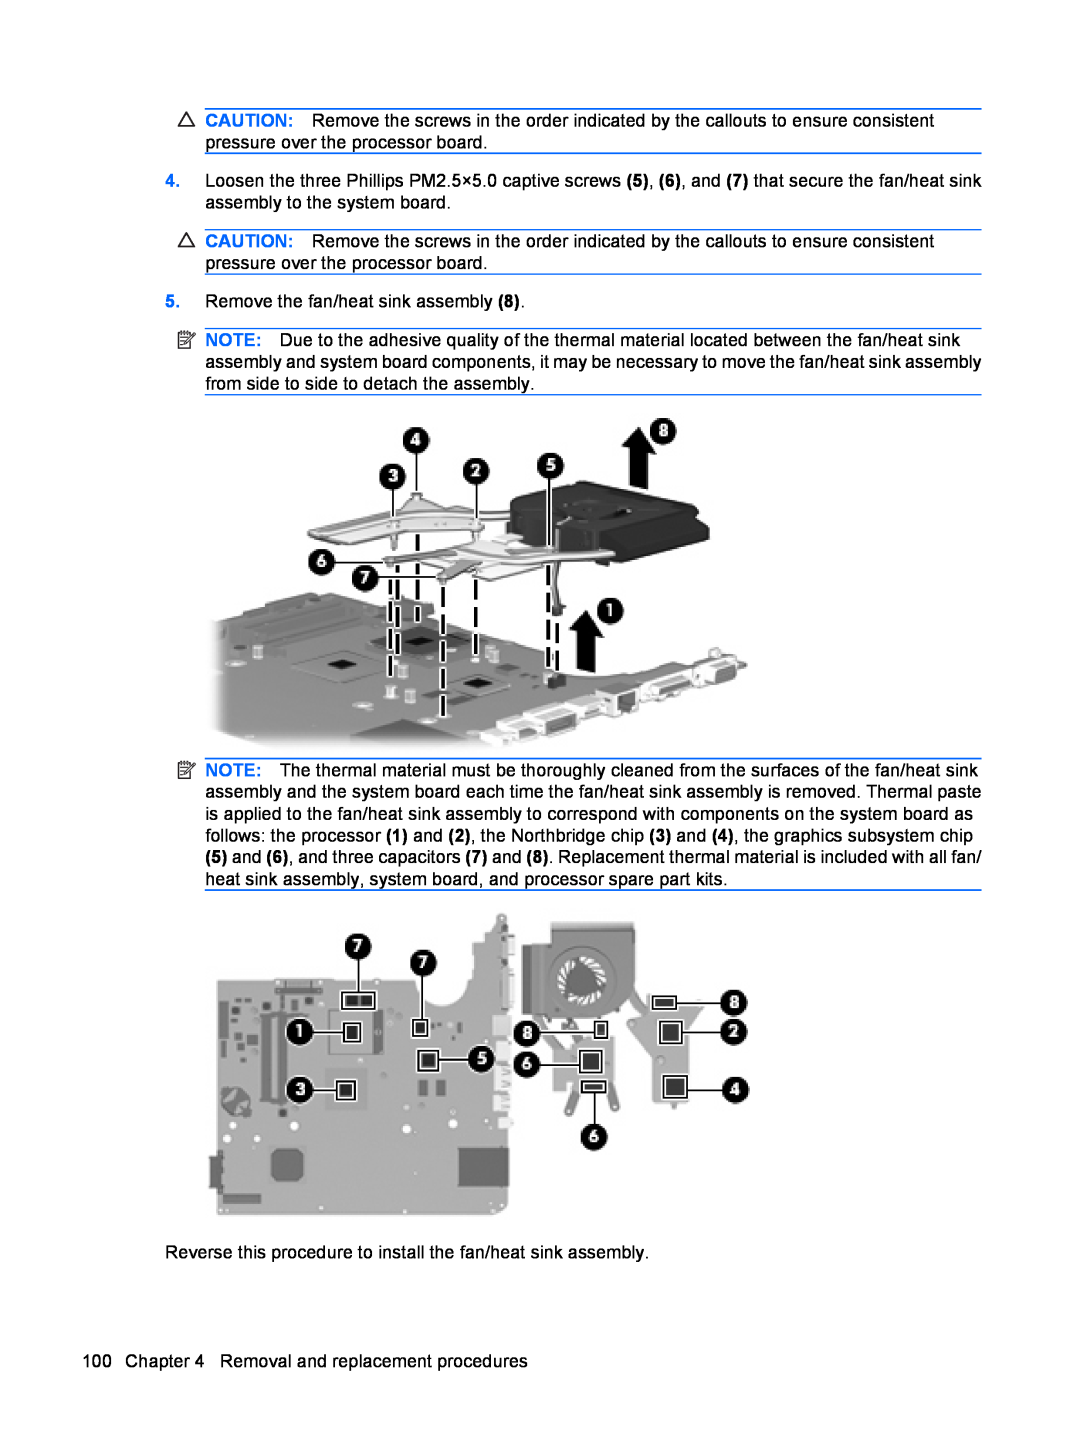 HP DV6 manual Remove the fan/heat sink assembly, Reverse this procedure to install the fan/heat sink assembly 